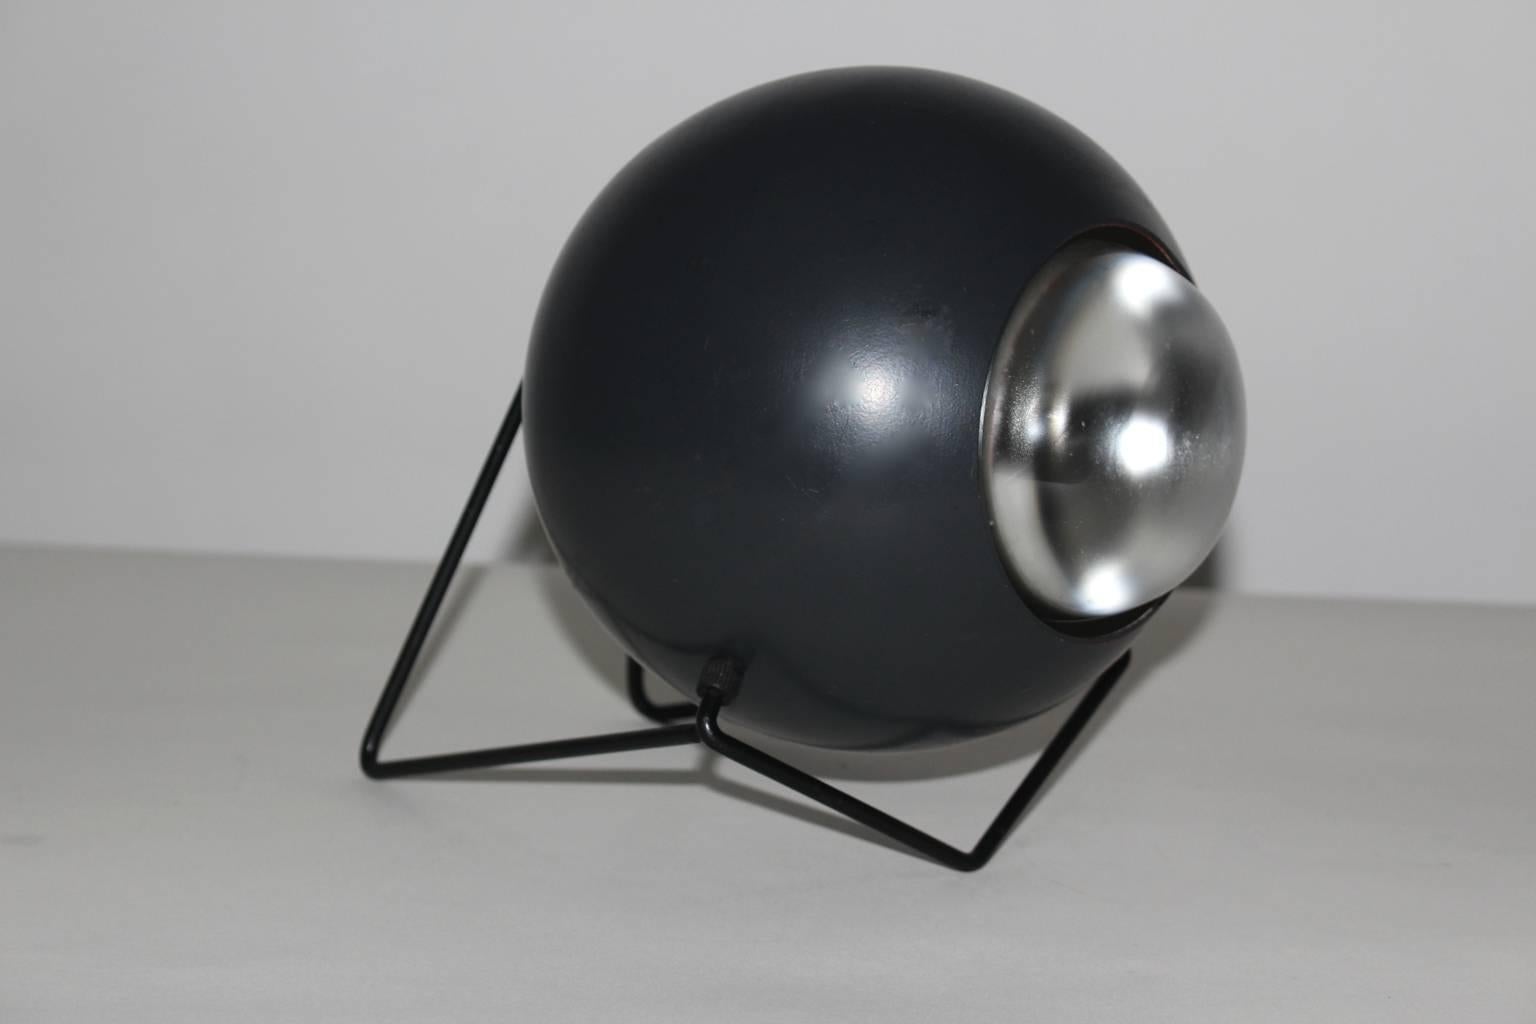 Mid century modern vintage black table lamp circular -  like with a hairpin metal wire base by Harry Gitlin for Stamford Lighting 1950s USA.
A great table lamp in a neutral color black with an adjustable globe ball lamp and a hairpin like metal wire